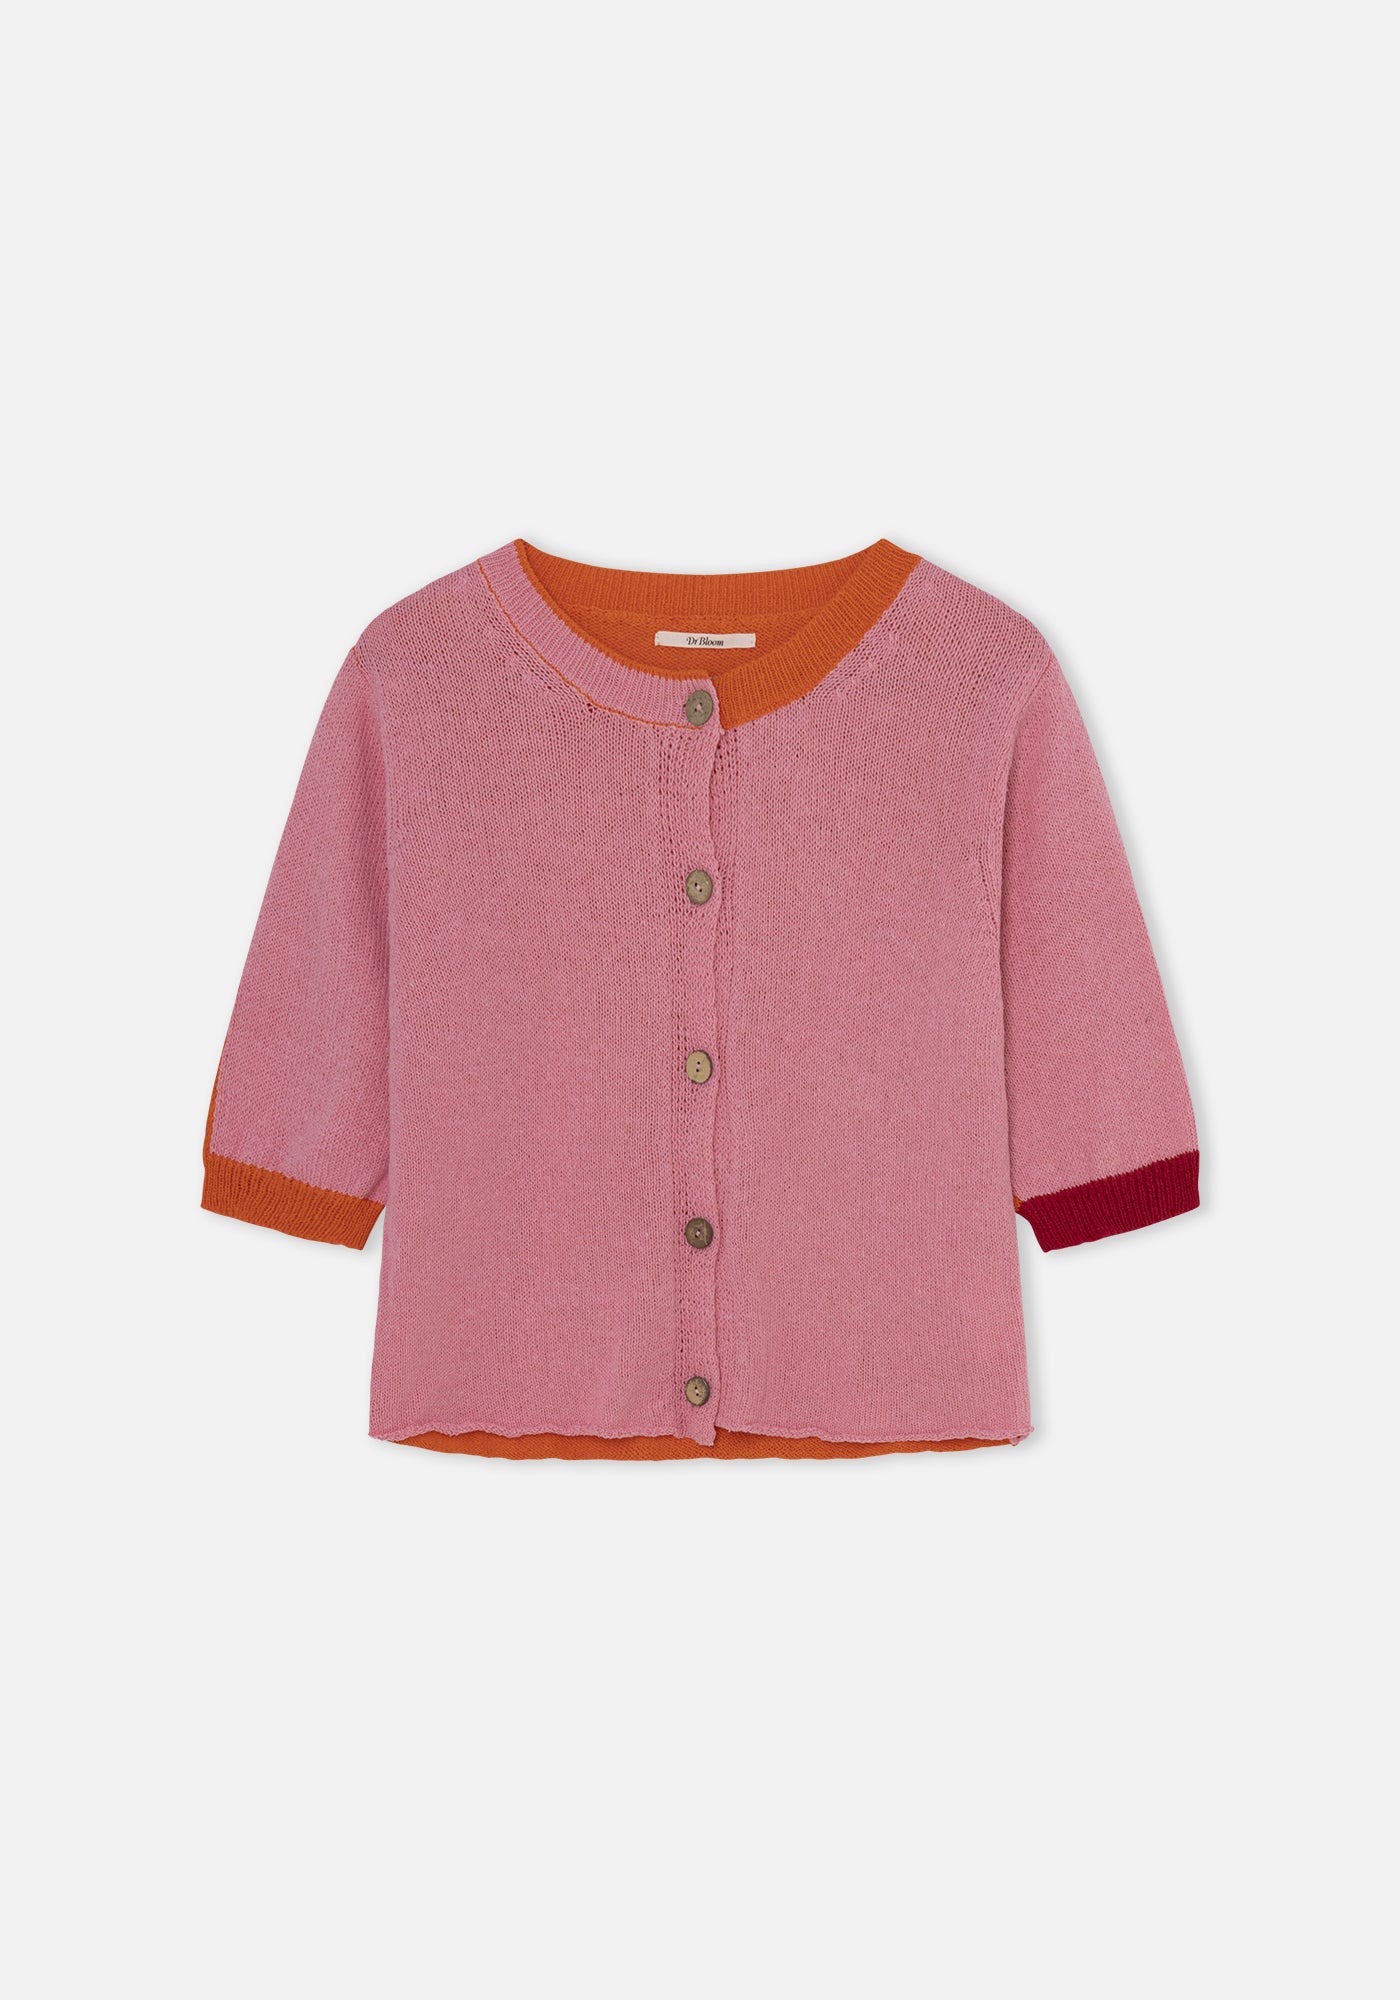 Dr Bloom Coco Pink Cardigan